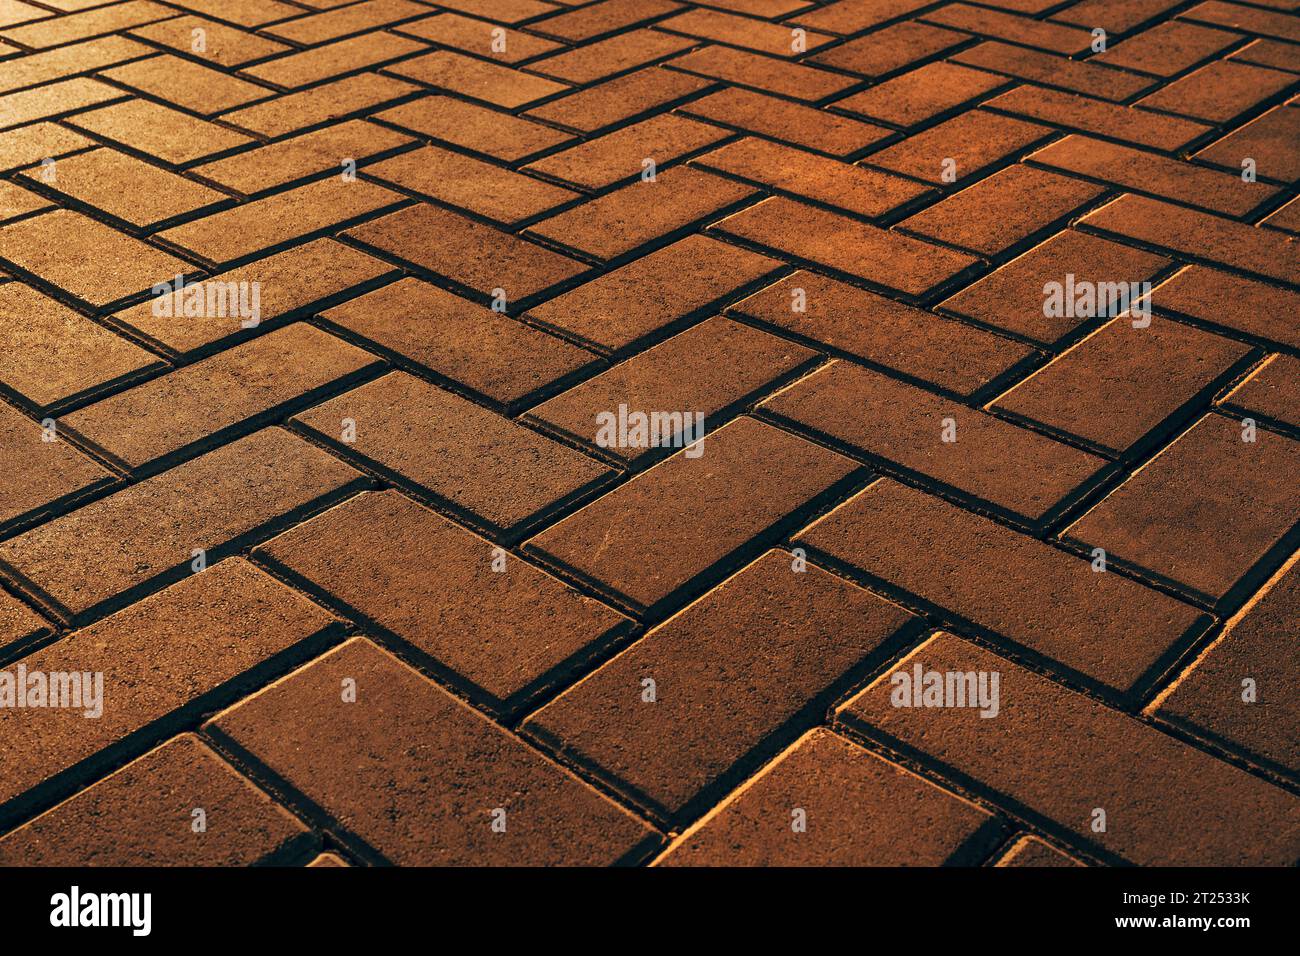 Paving bricks in diminishing perspective as abstract background, selective focus Stock Photo